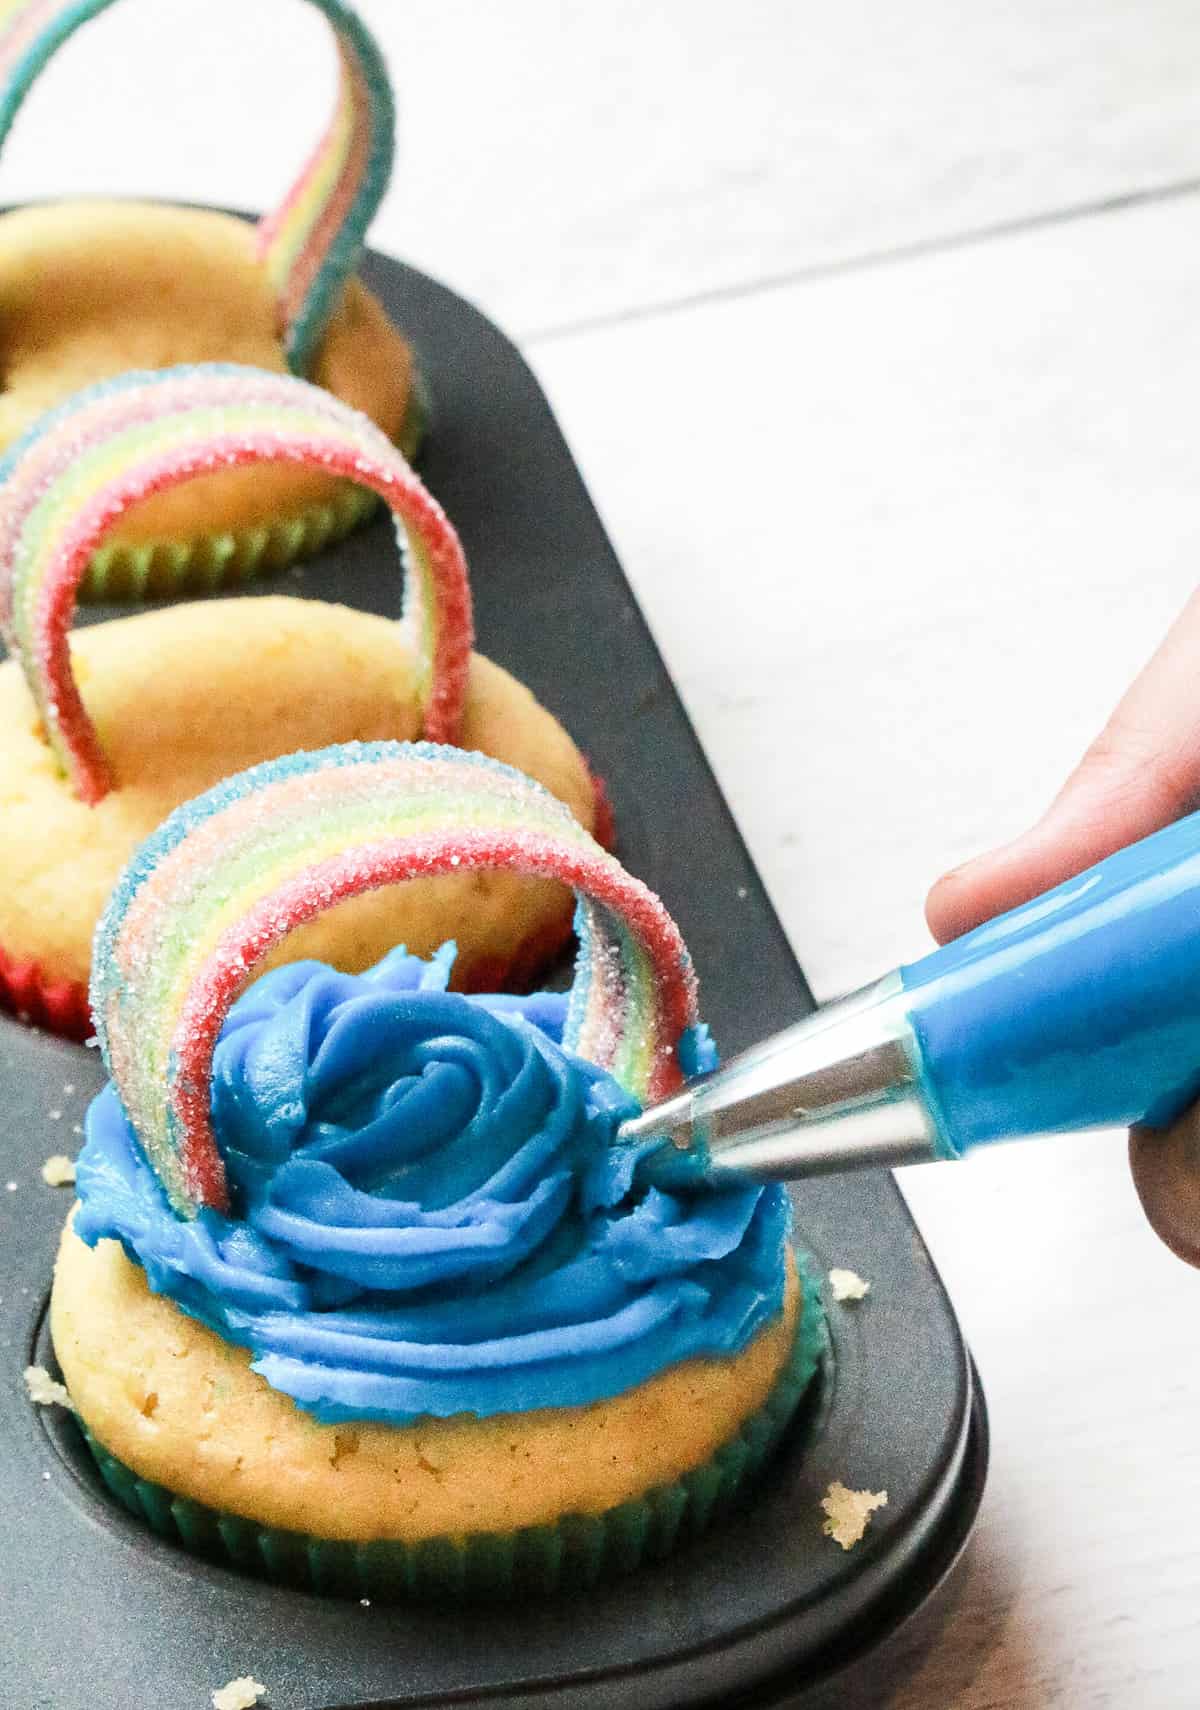 Put the buttercream frosting in a piping bag and frost the top of the cupcake.